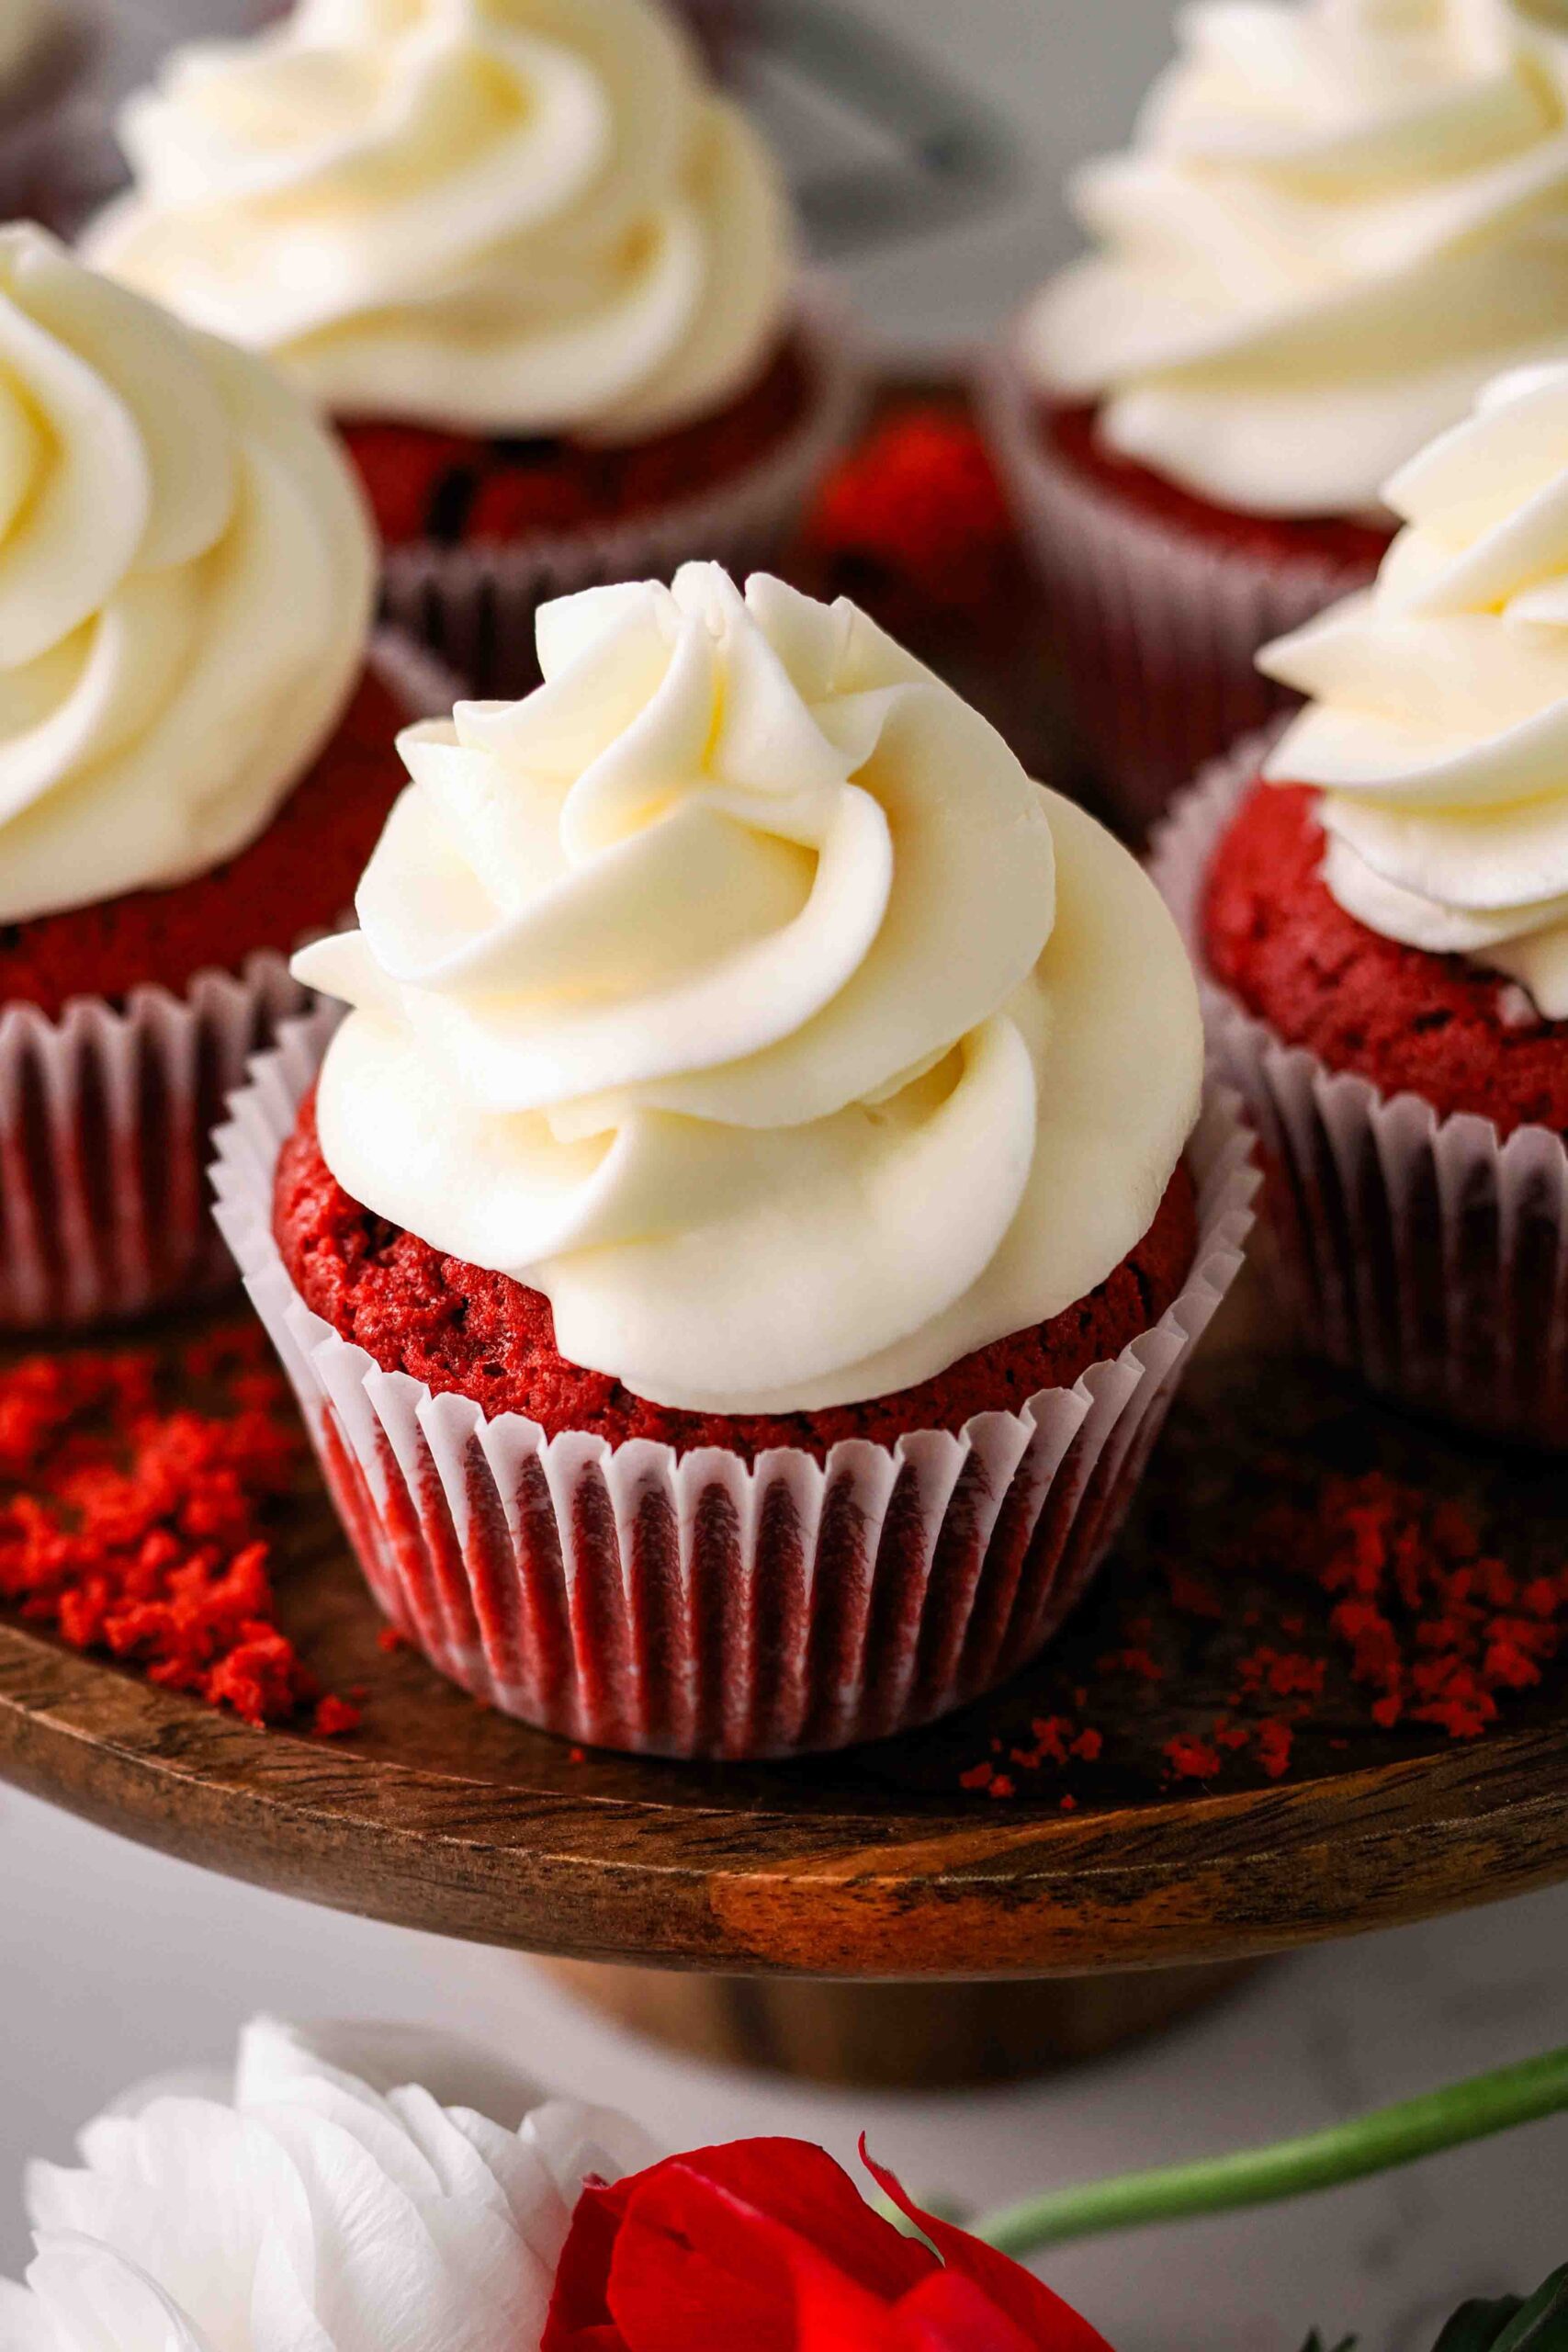 Closeup of a red velvet cupcake with a cream cheese frosting swirl on a wooden platter.